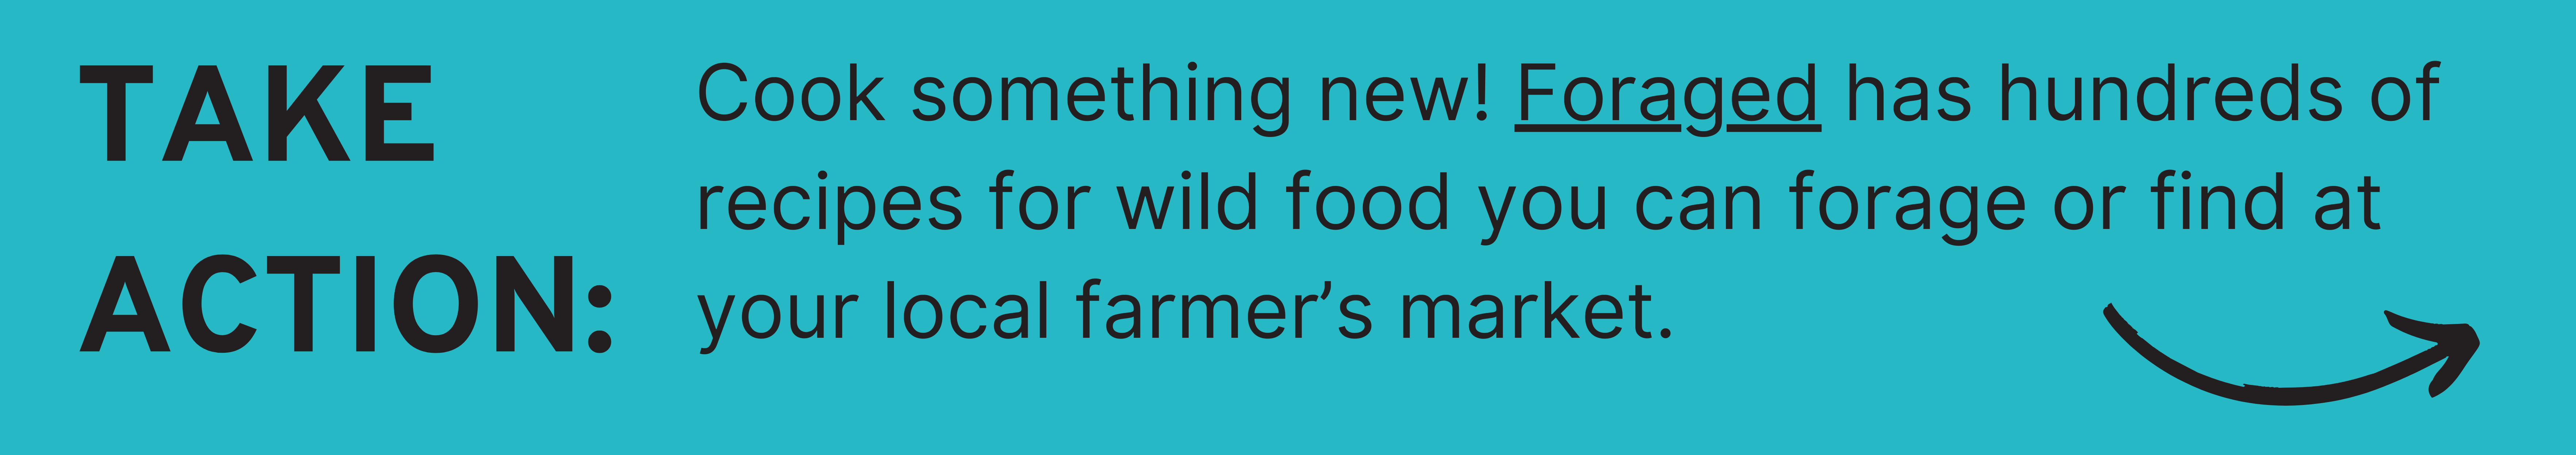 Take Action: Cook something new! Foraged has hundreds of recipes for any wild food you can forage or find at your local farmer’s market.